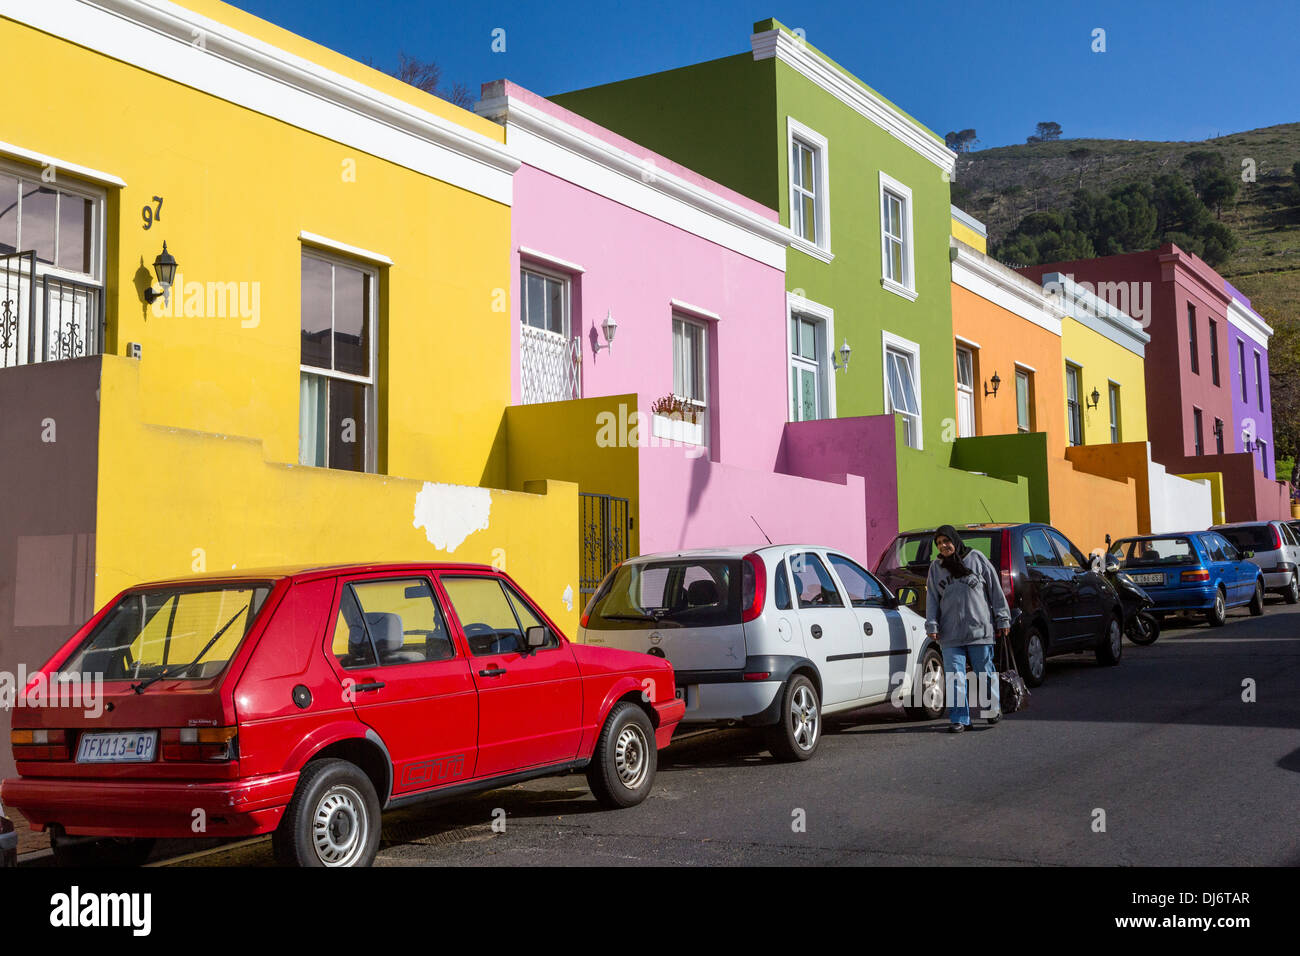 South Africa, Cape Town, Bo-kaap. Colorful Houses. Stock Photo